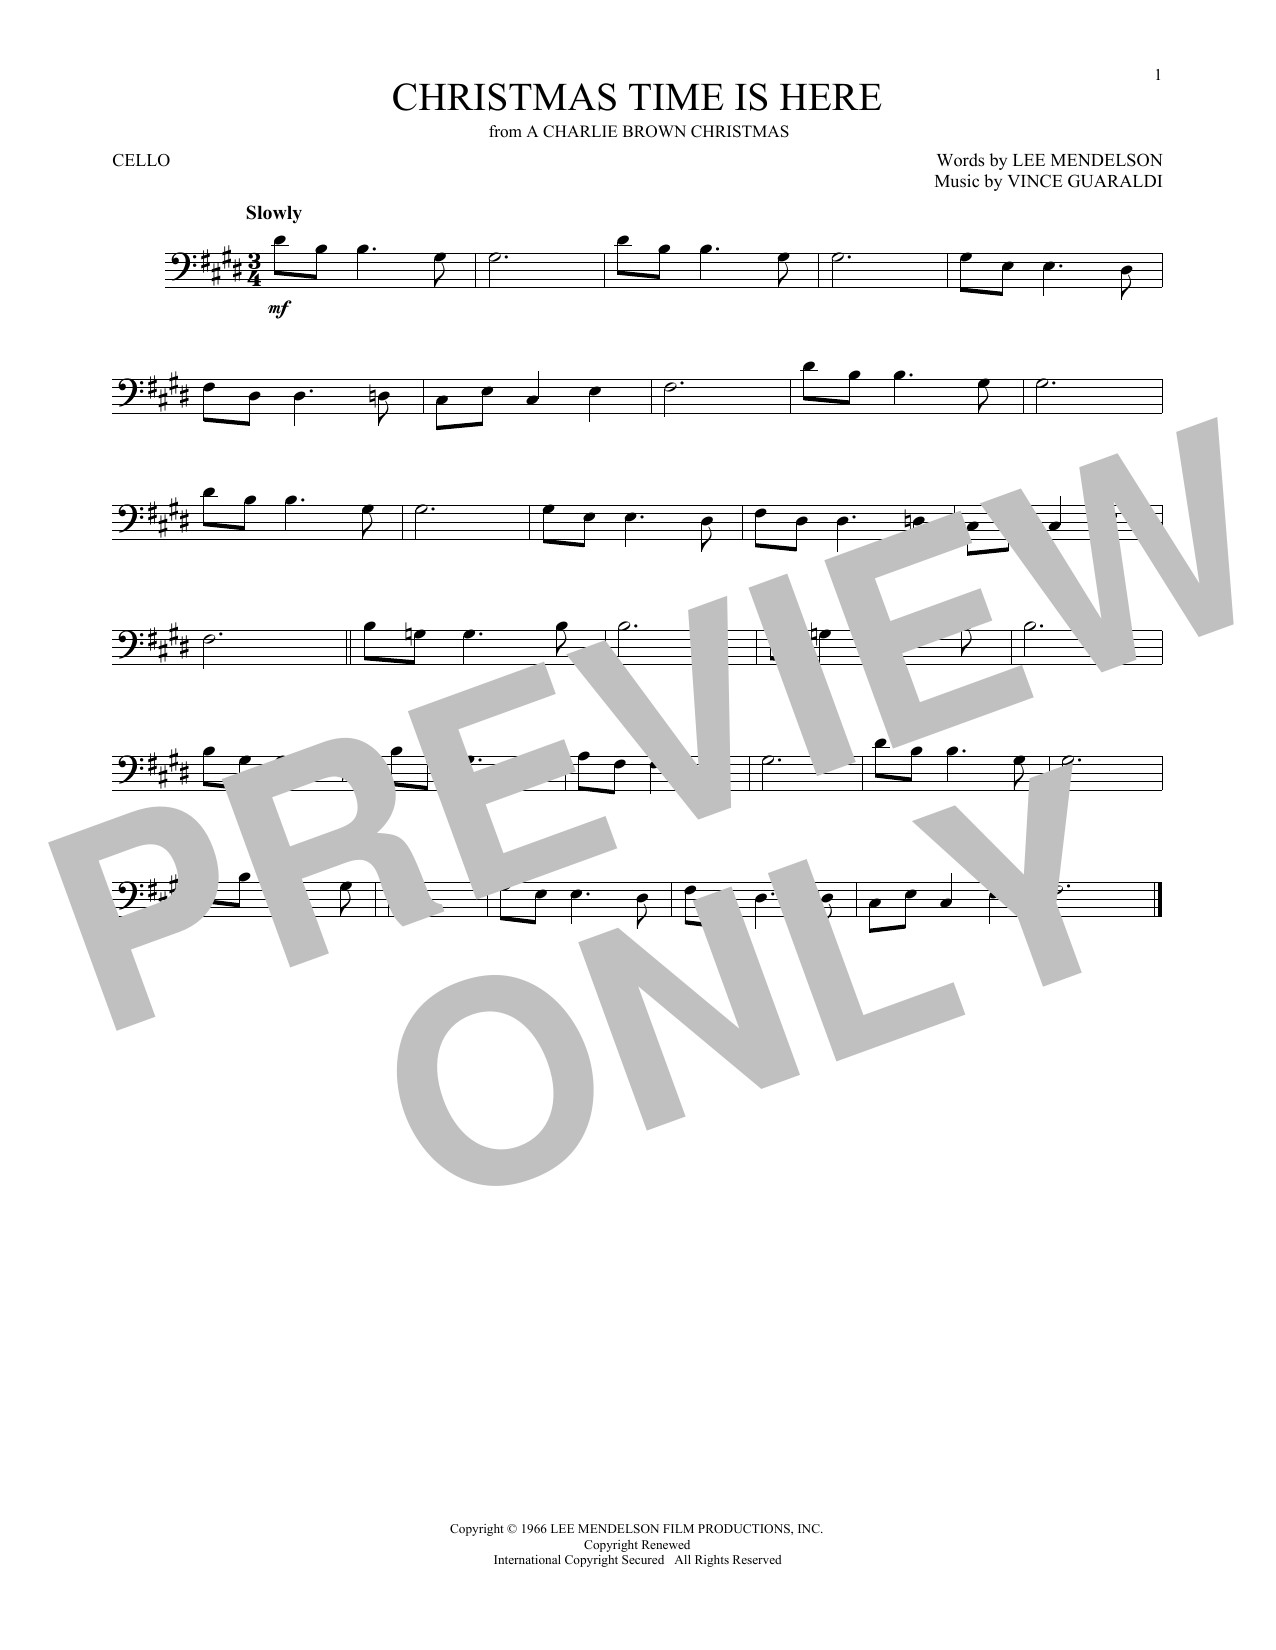 Download Vince Guaraldi Christmas Time Is Here Sheet Music